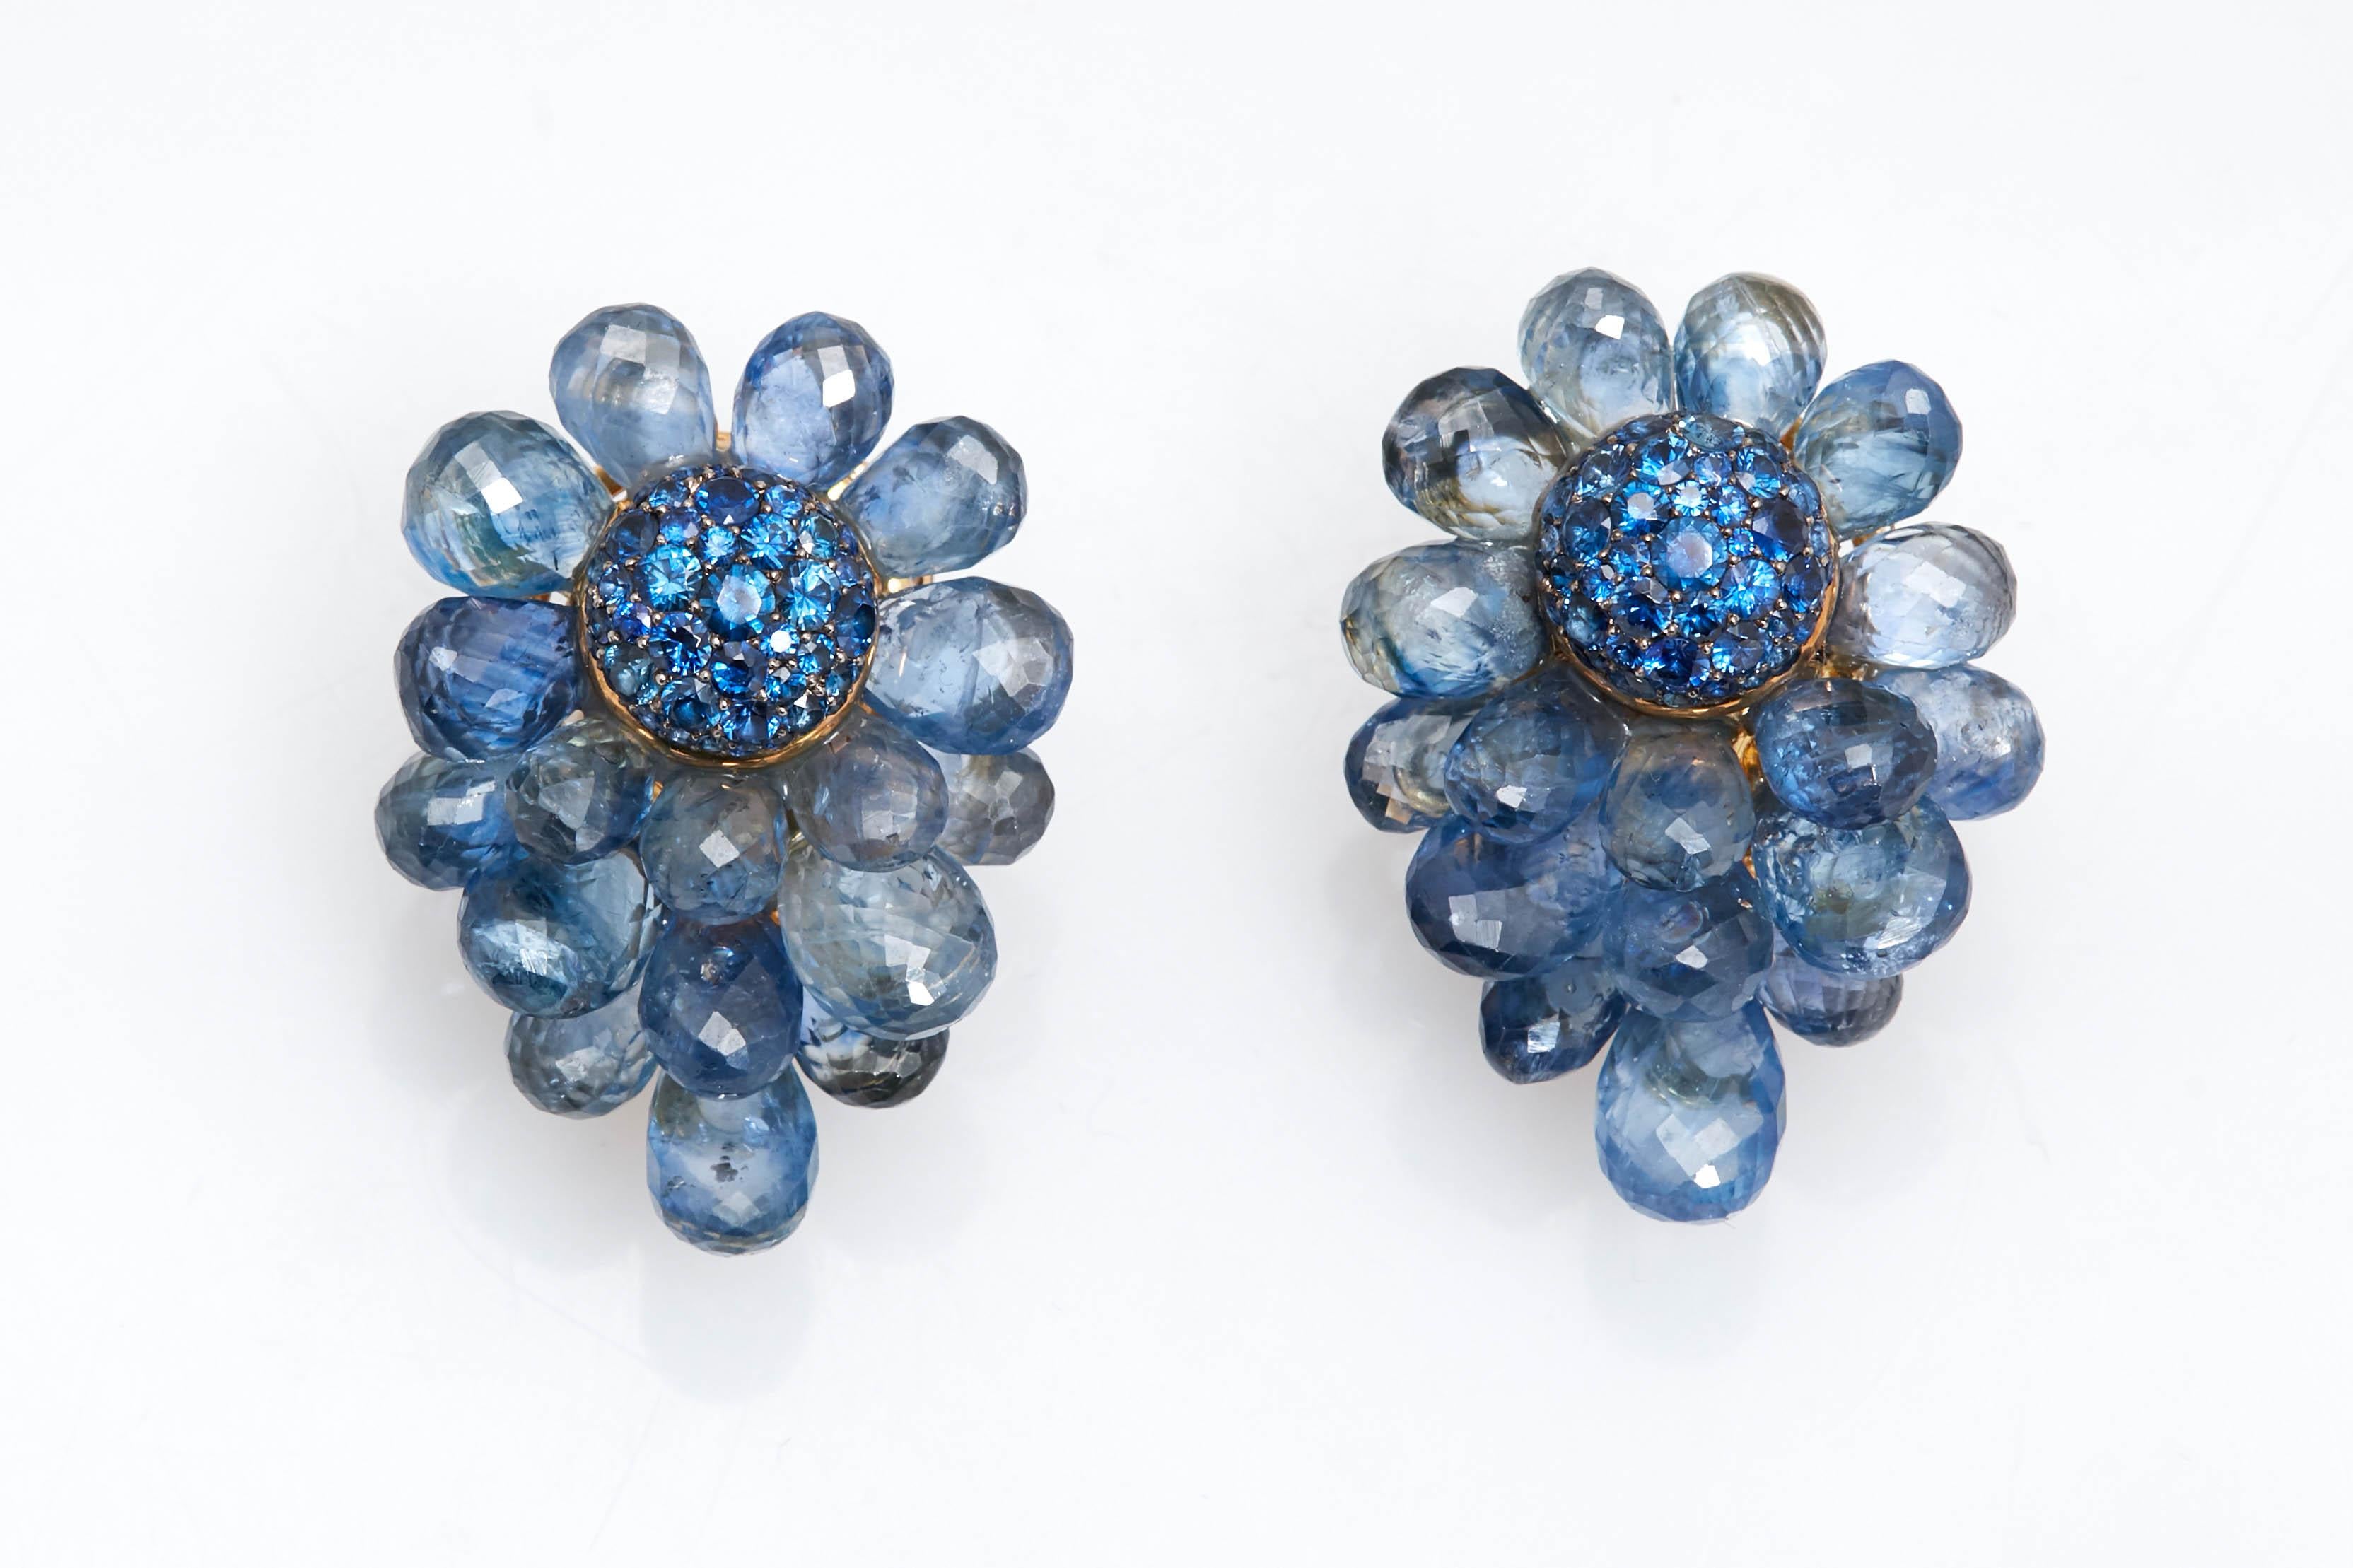 A chic pair of gold, sapphire briolette and sapphire cluster earclips.
18 kt., centering circular domes encrusted with round sapphires, within overlapping petals of 34 sapphire briolettes, with maker's mark, made in the USA circa 1960. 